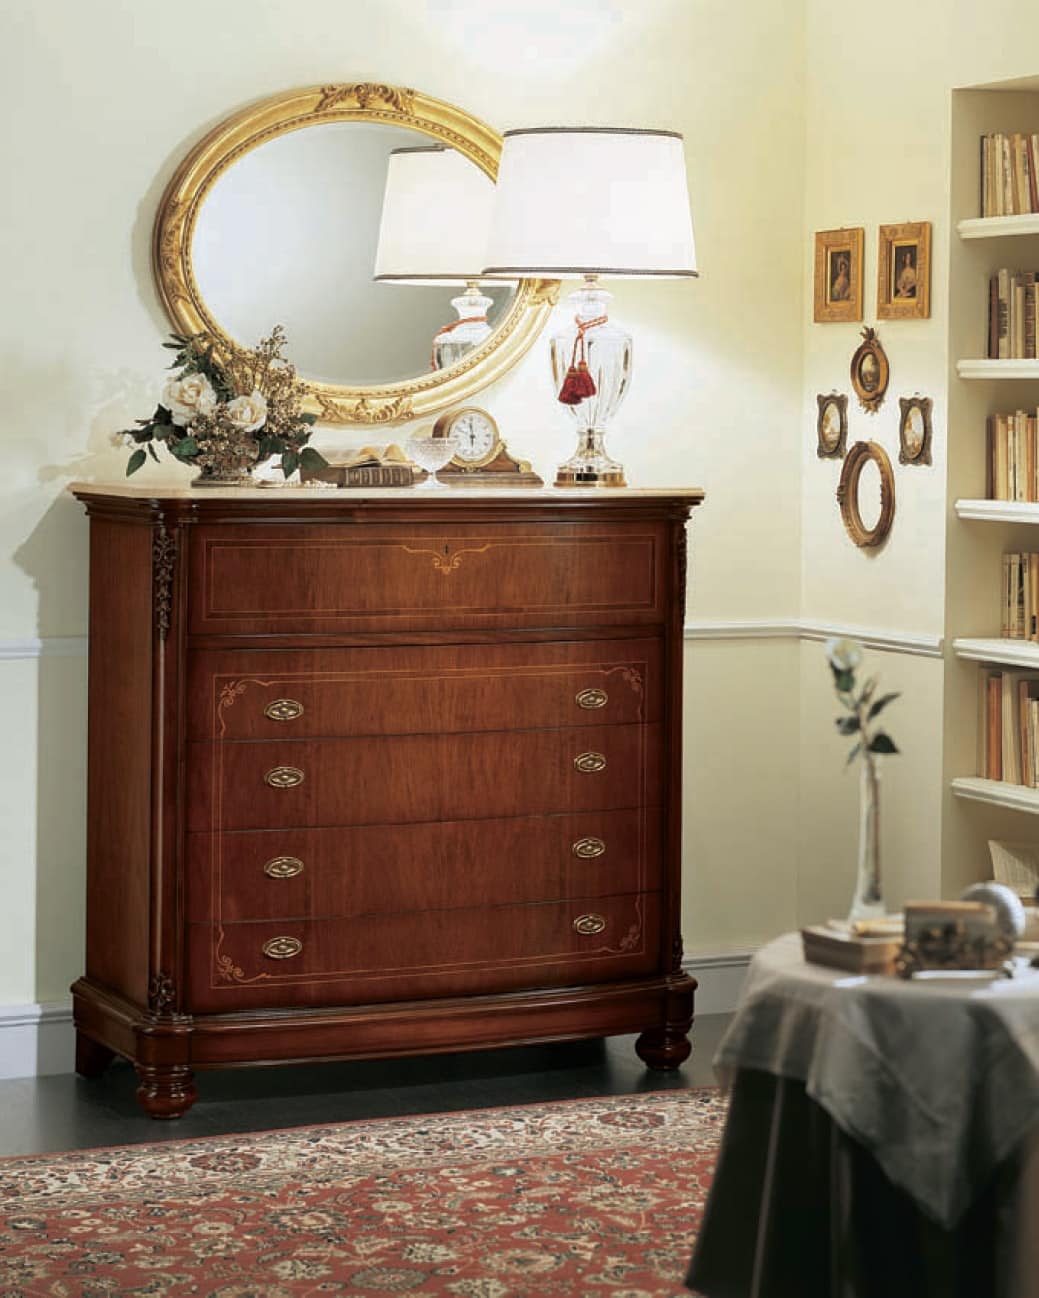 Gardenia flap, Chest of drawers with flap door and marble top, in walnut